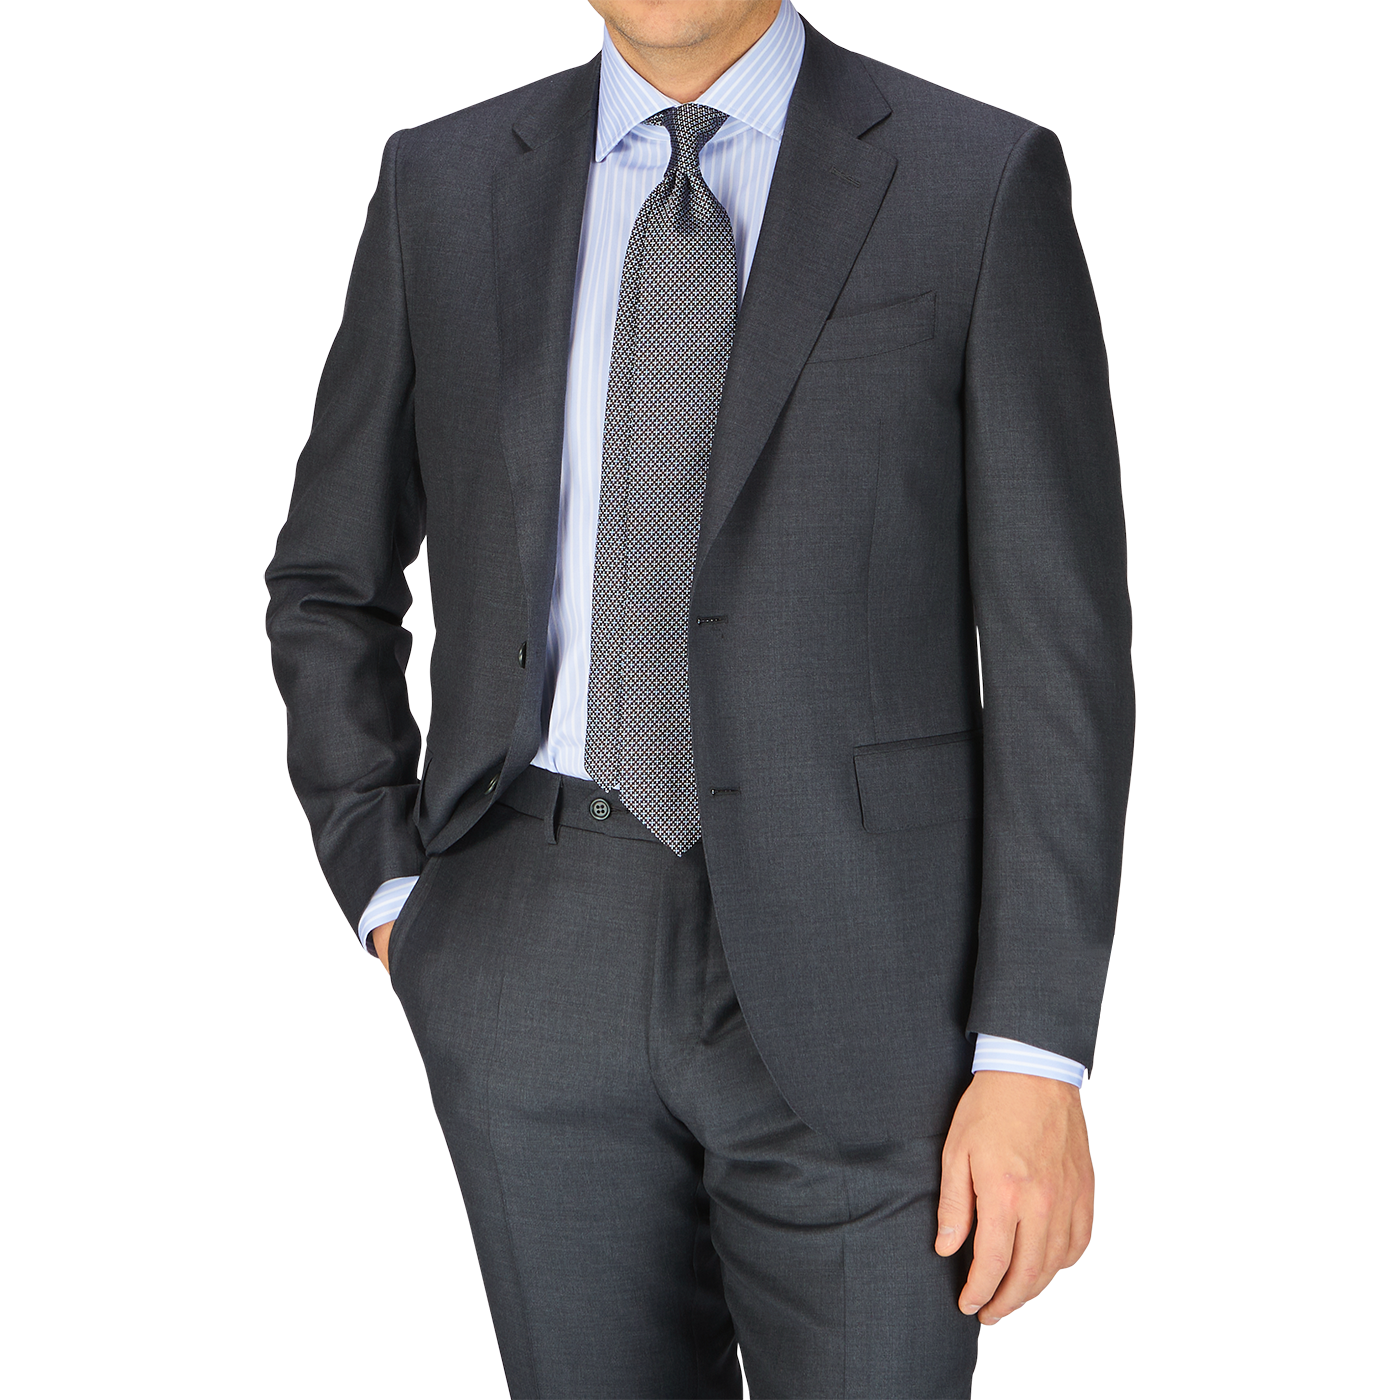 A man in a Canali Charcoal Grey Wool Notch Lapel Suit looks timeless and formal.